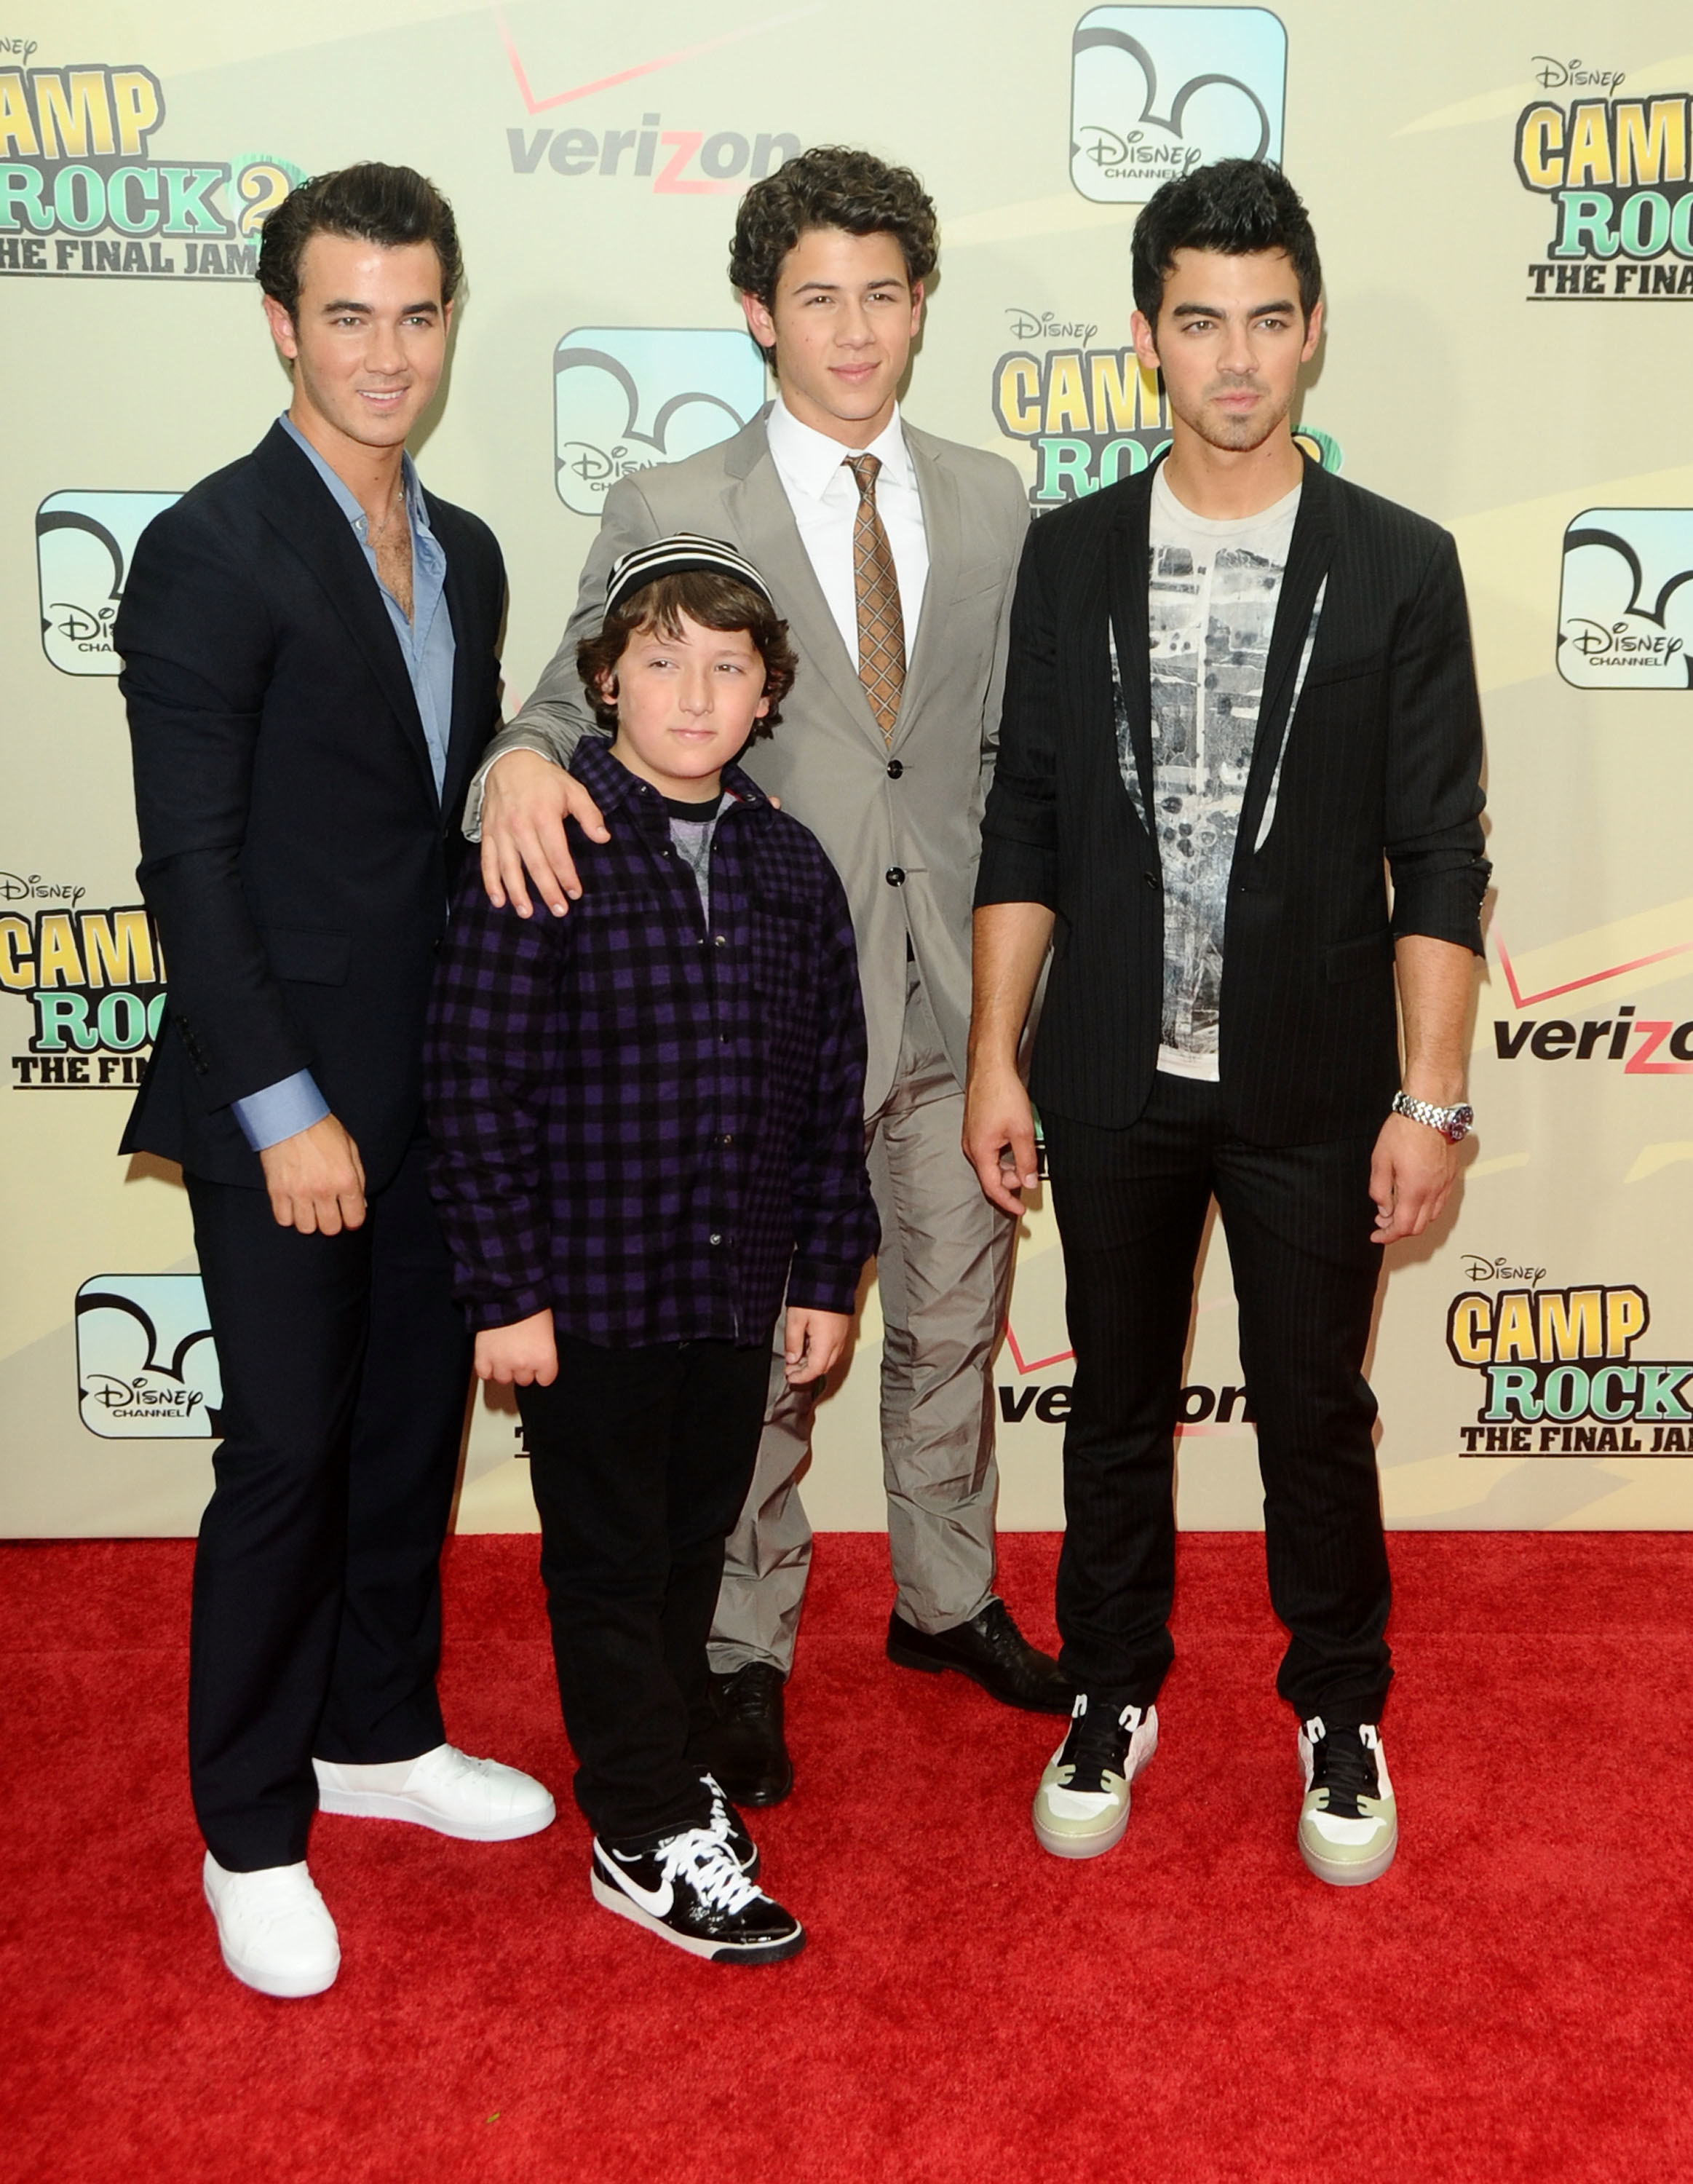 older photo of all 4 on the red carpet